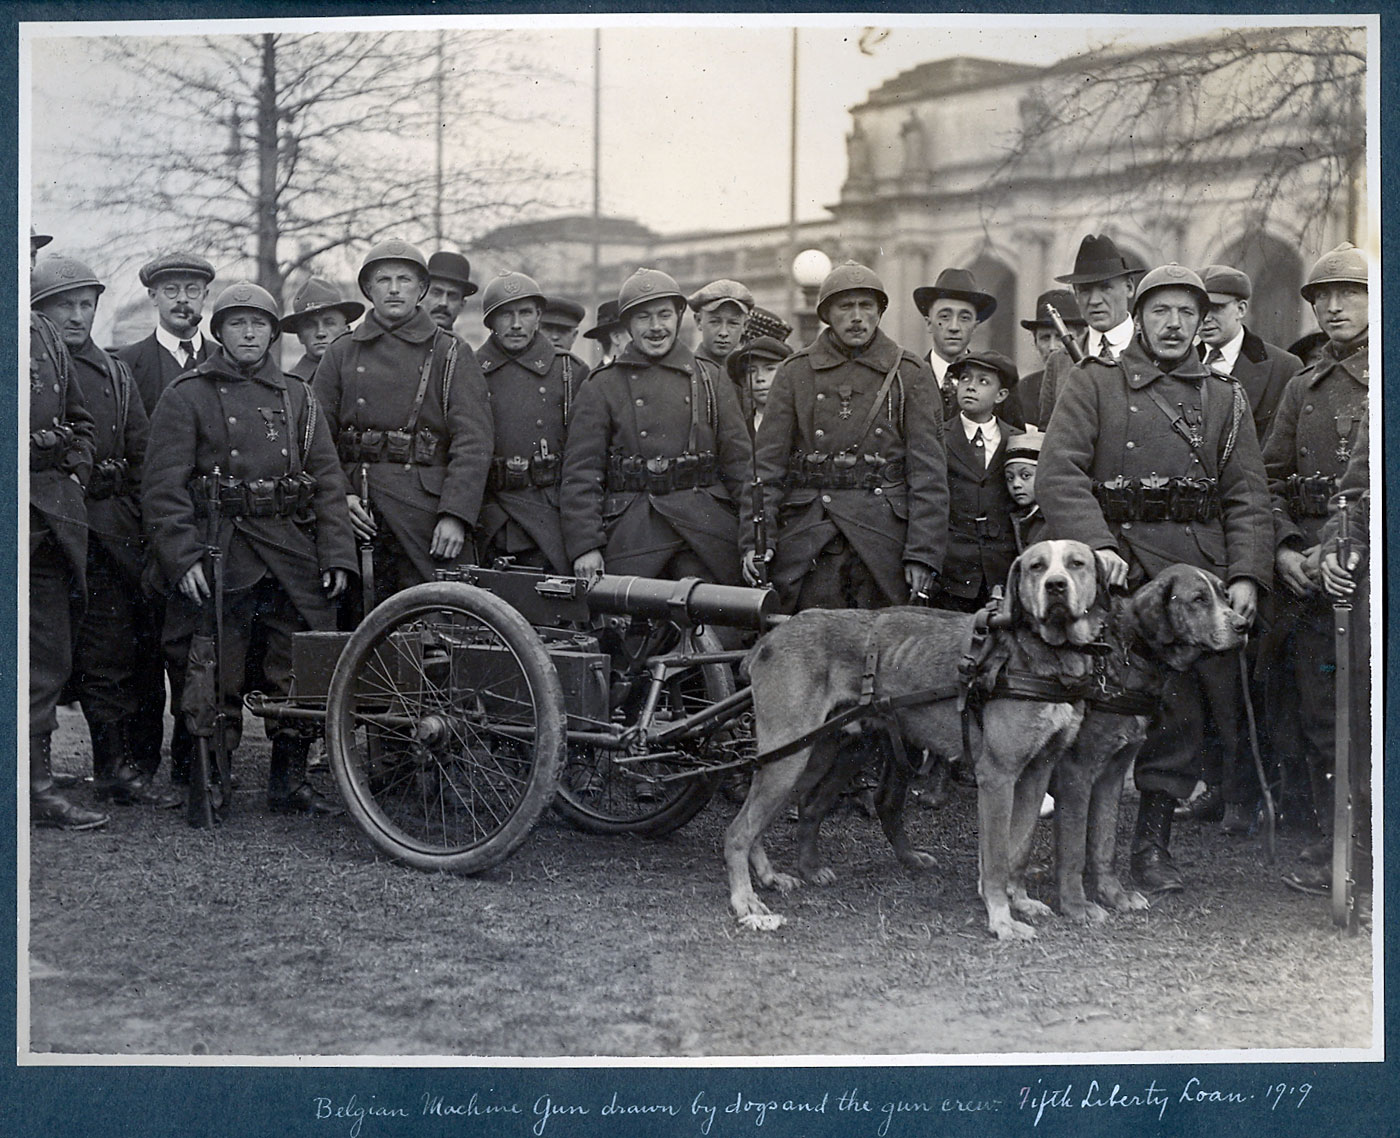 I believe this was for publicity purposes during the Fifth Liberty Loan drive of 1919 taken in Washington D.C. The Belgians used dogs frequently in WWI to pull their machine gun units. View full size.